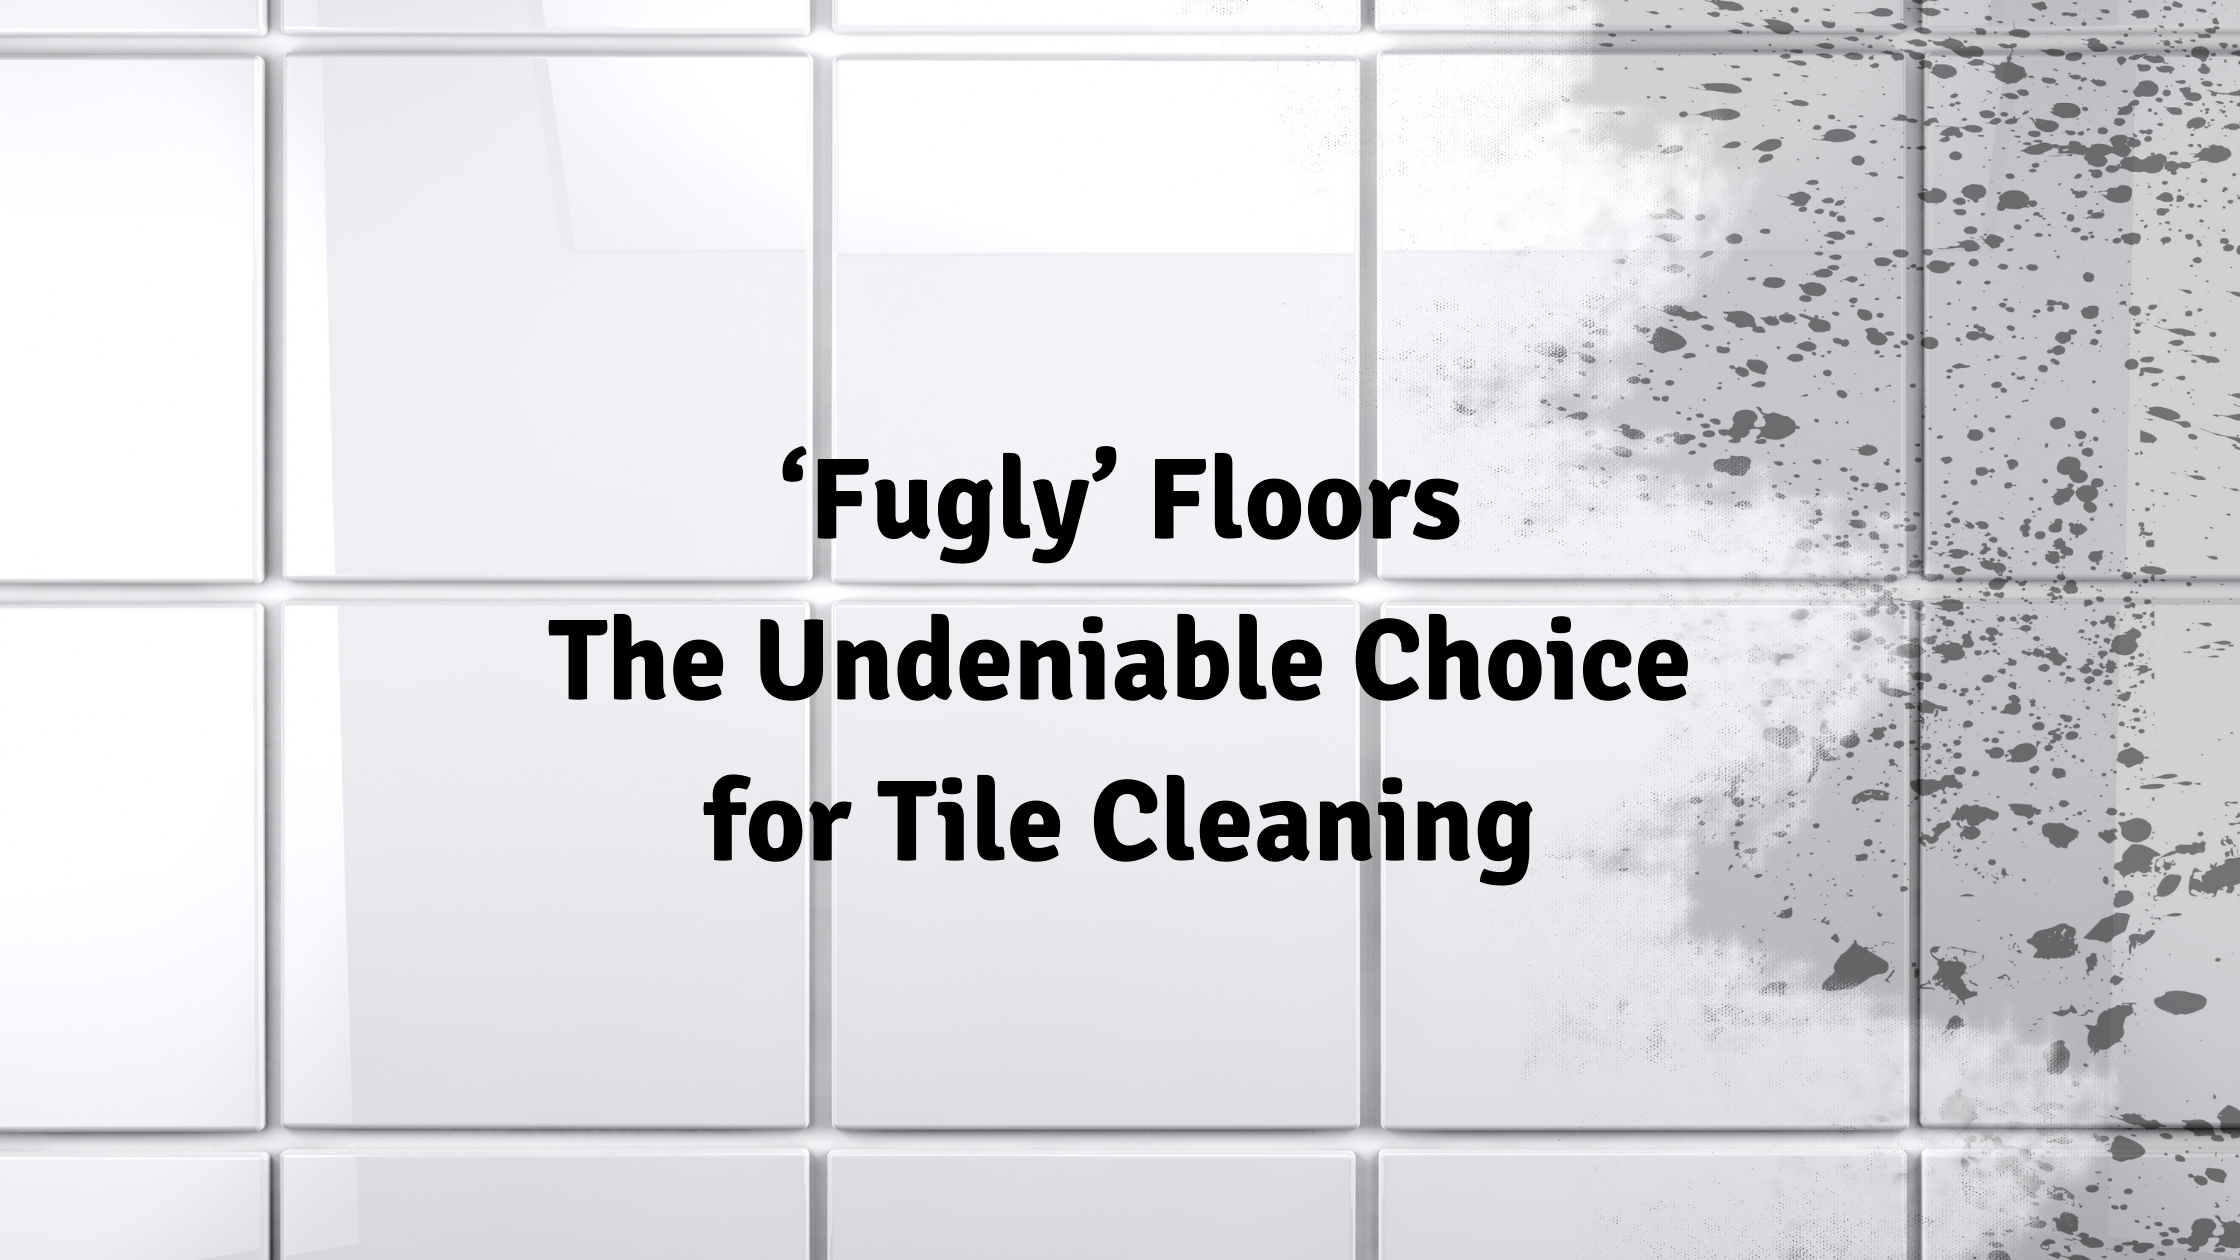 ‘Fugly’ Floors – The Undeniable Choice for Tile Cleaning 6